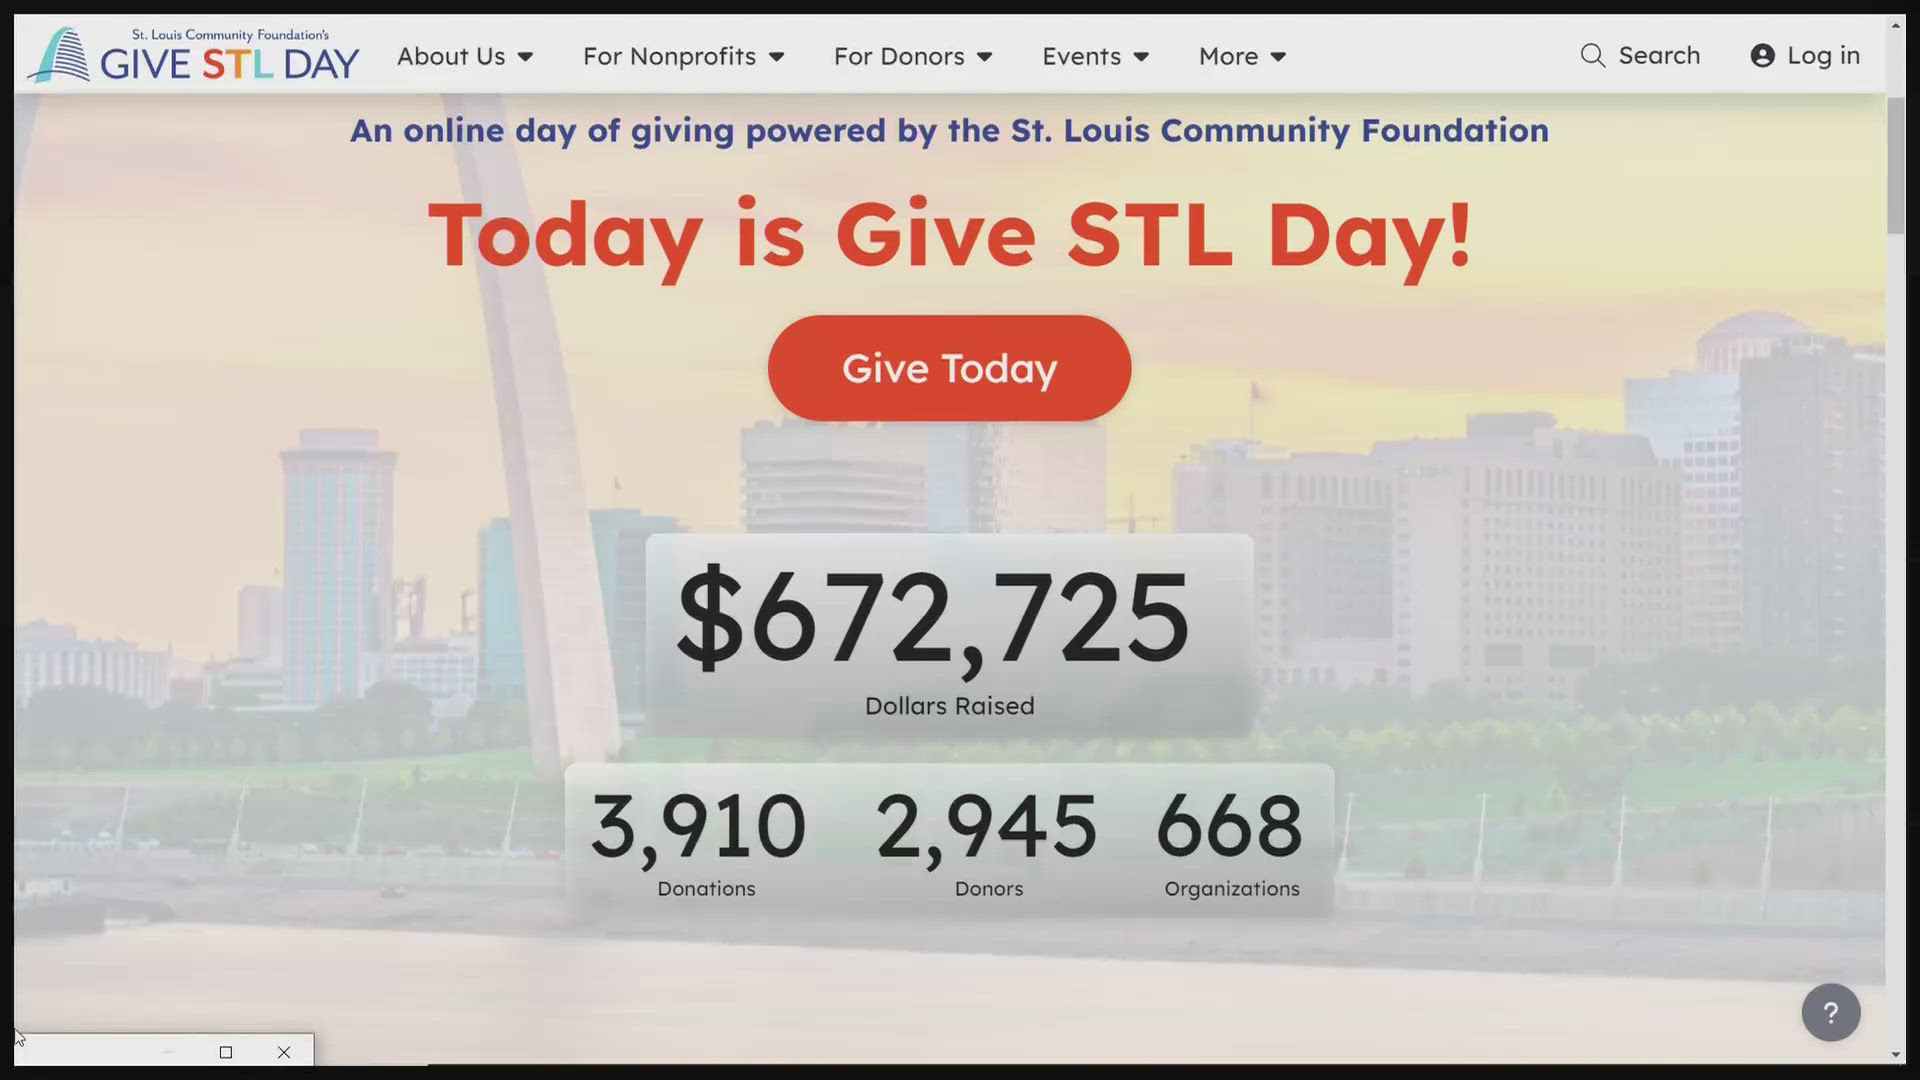 On May 9, hundreds of area nonprofits are participating in Give STL Day, sponsored by the St. Louis Community Foundation.